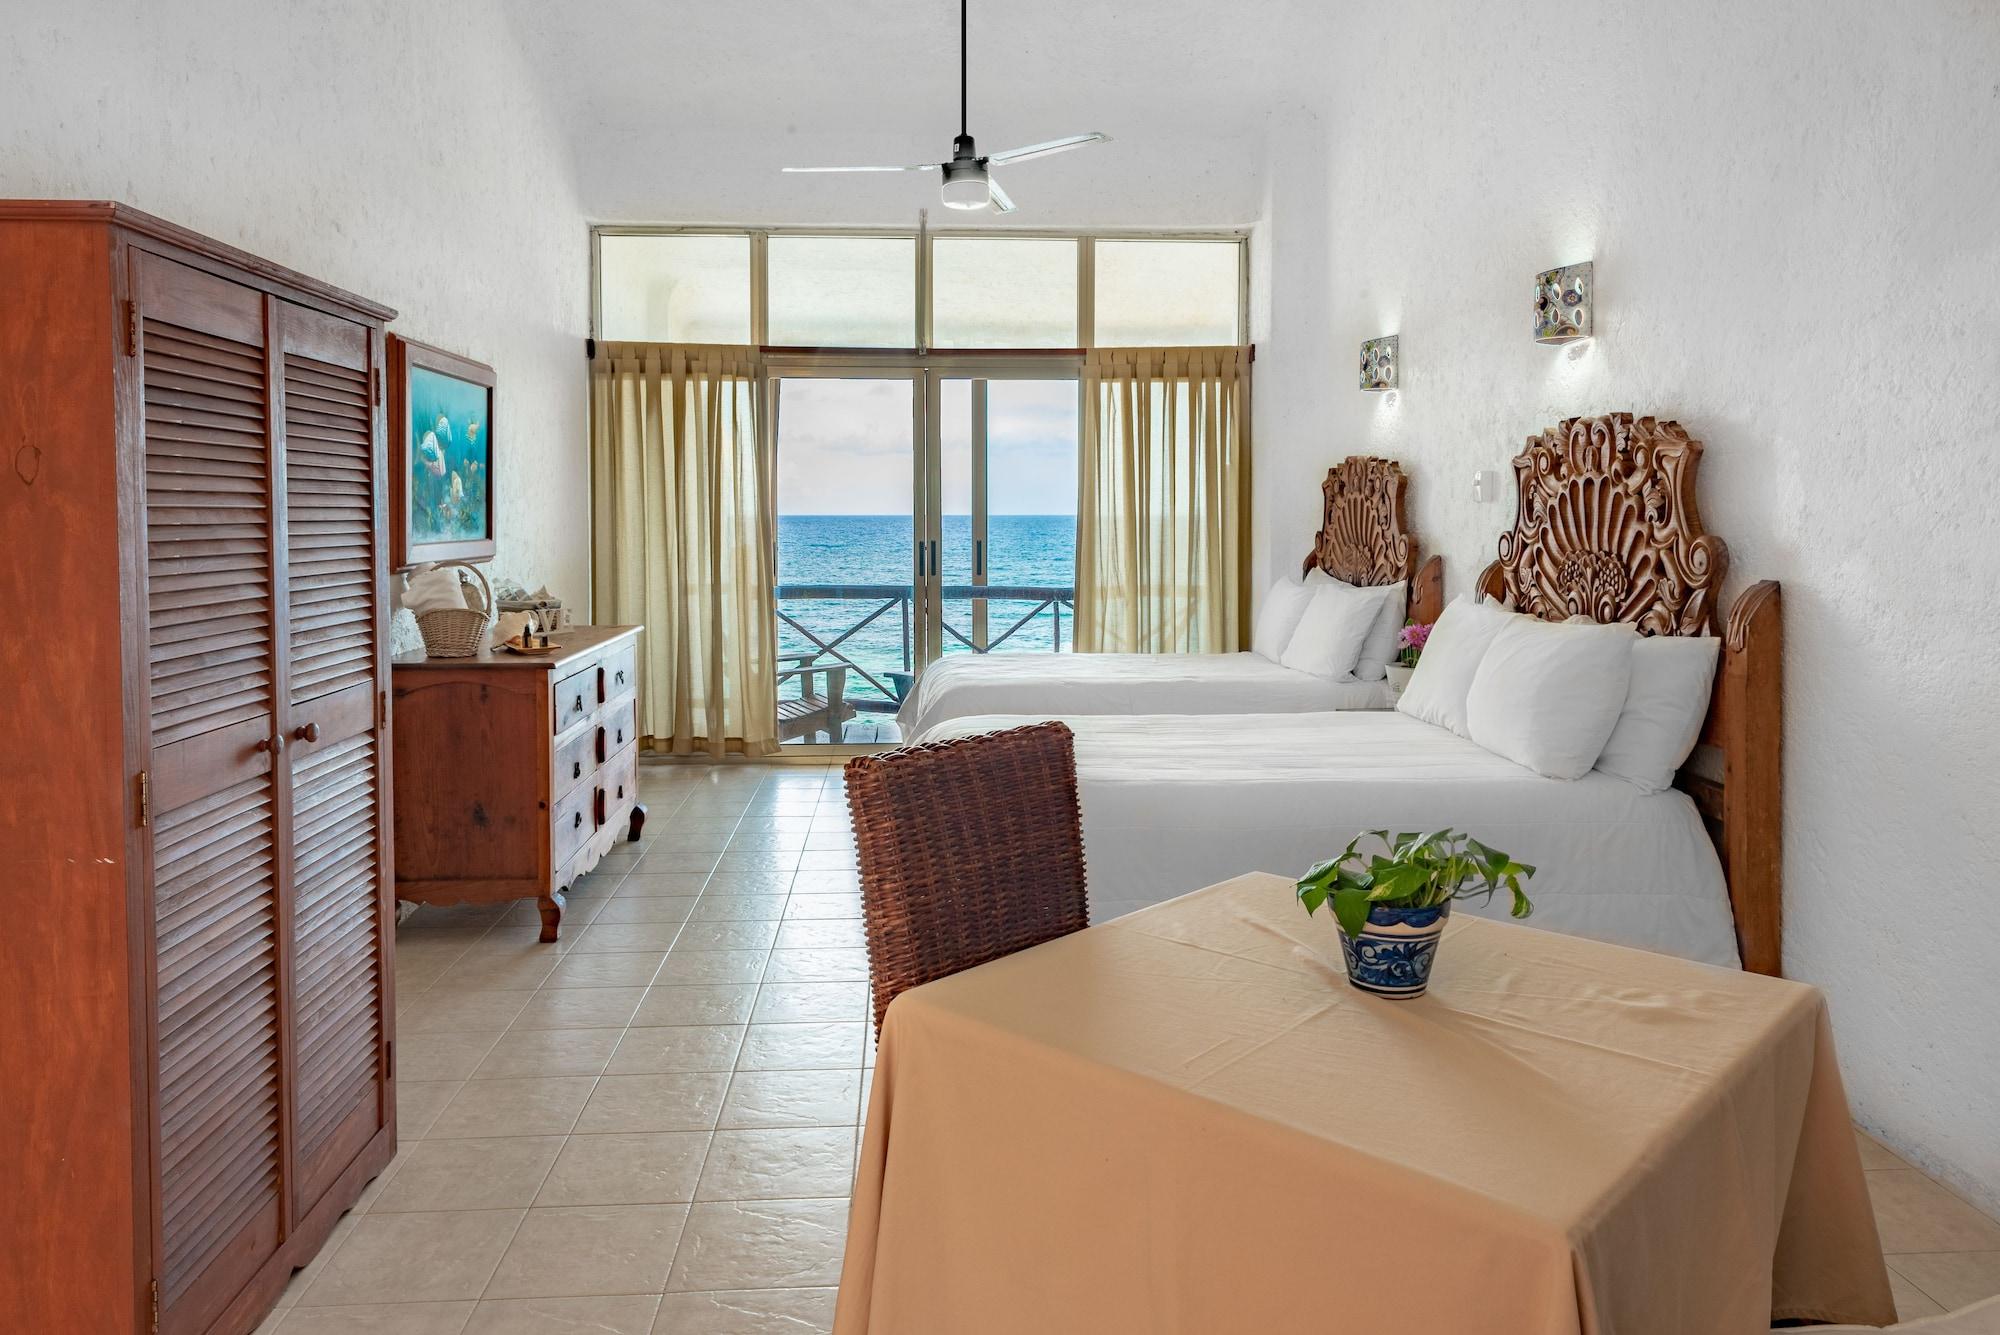 HOTEL VENTANAS AL MAR BEACH FRONT COZUMEL (ADULTS ONLY) COZUMEL 4* (Mexico)  - from US$ 203 | BOOKED